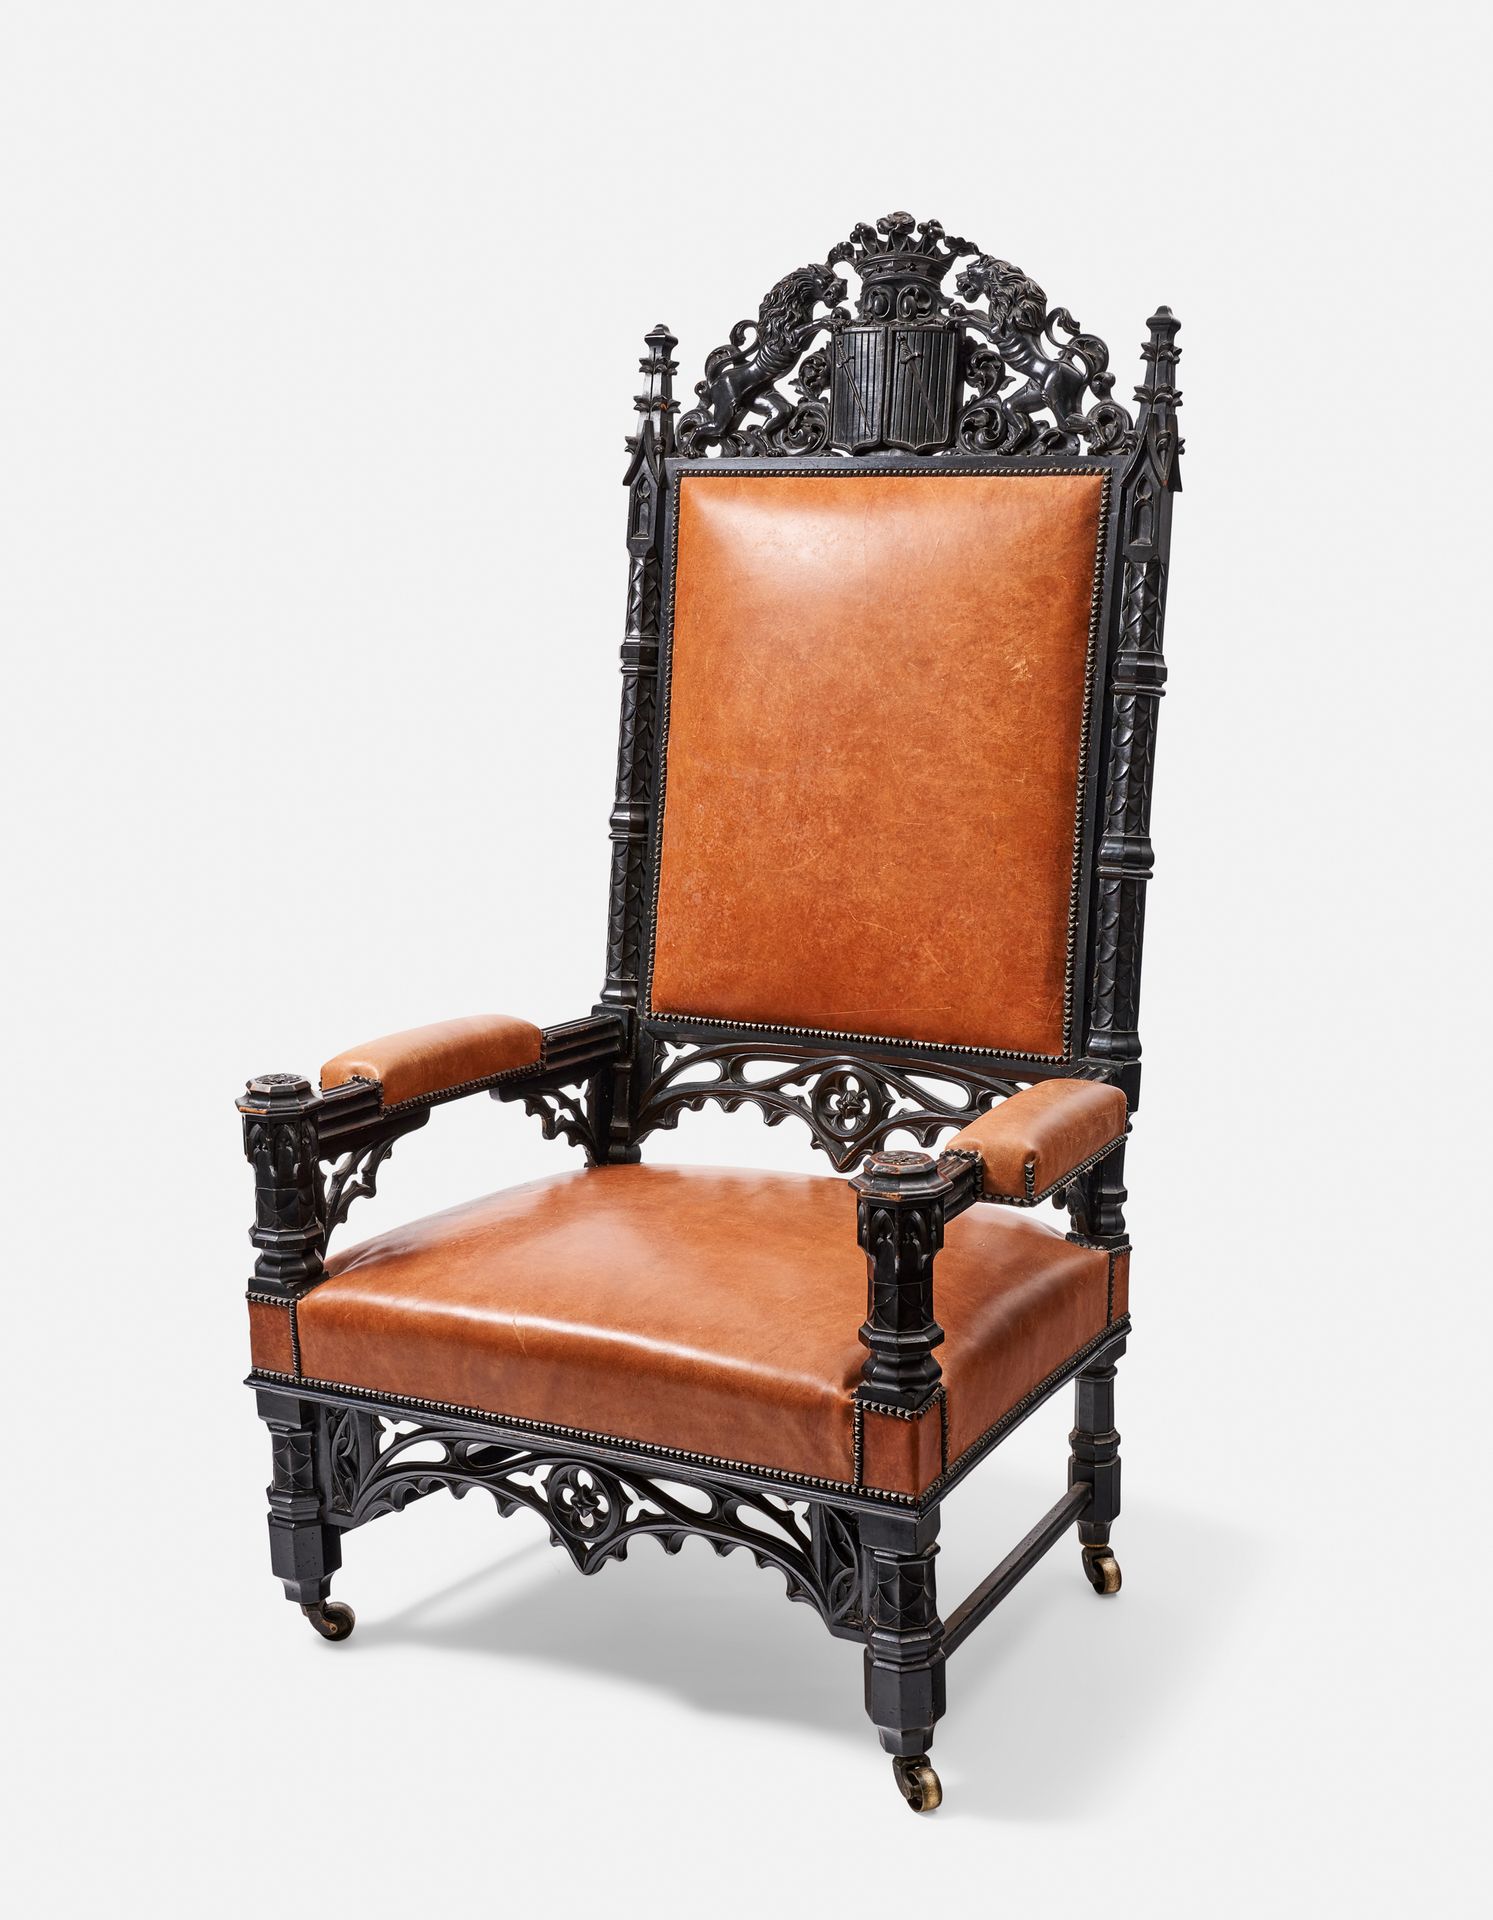 Null A LARGE AND IMPOSING 19TH CENTURY CATHEDRAL ARMCHAIR

French work in Neo-Go&hellip;